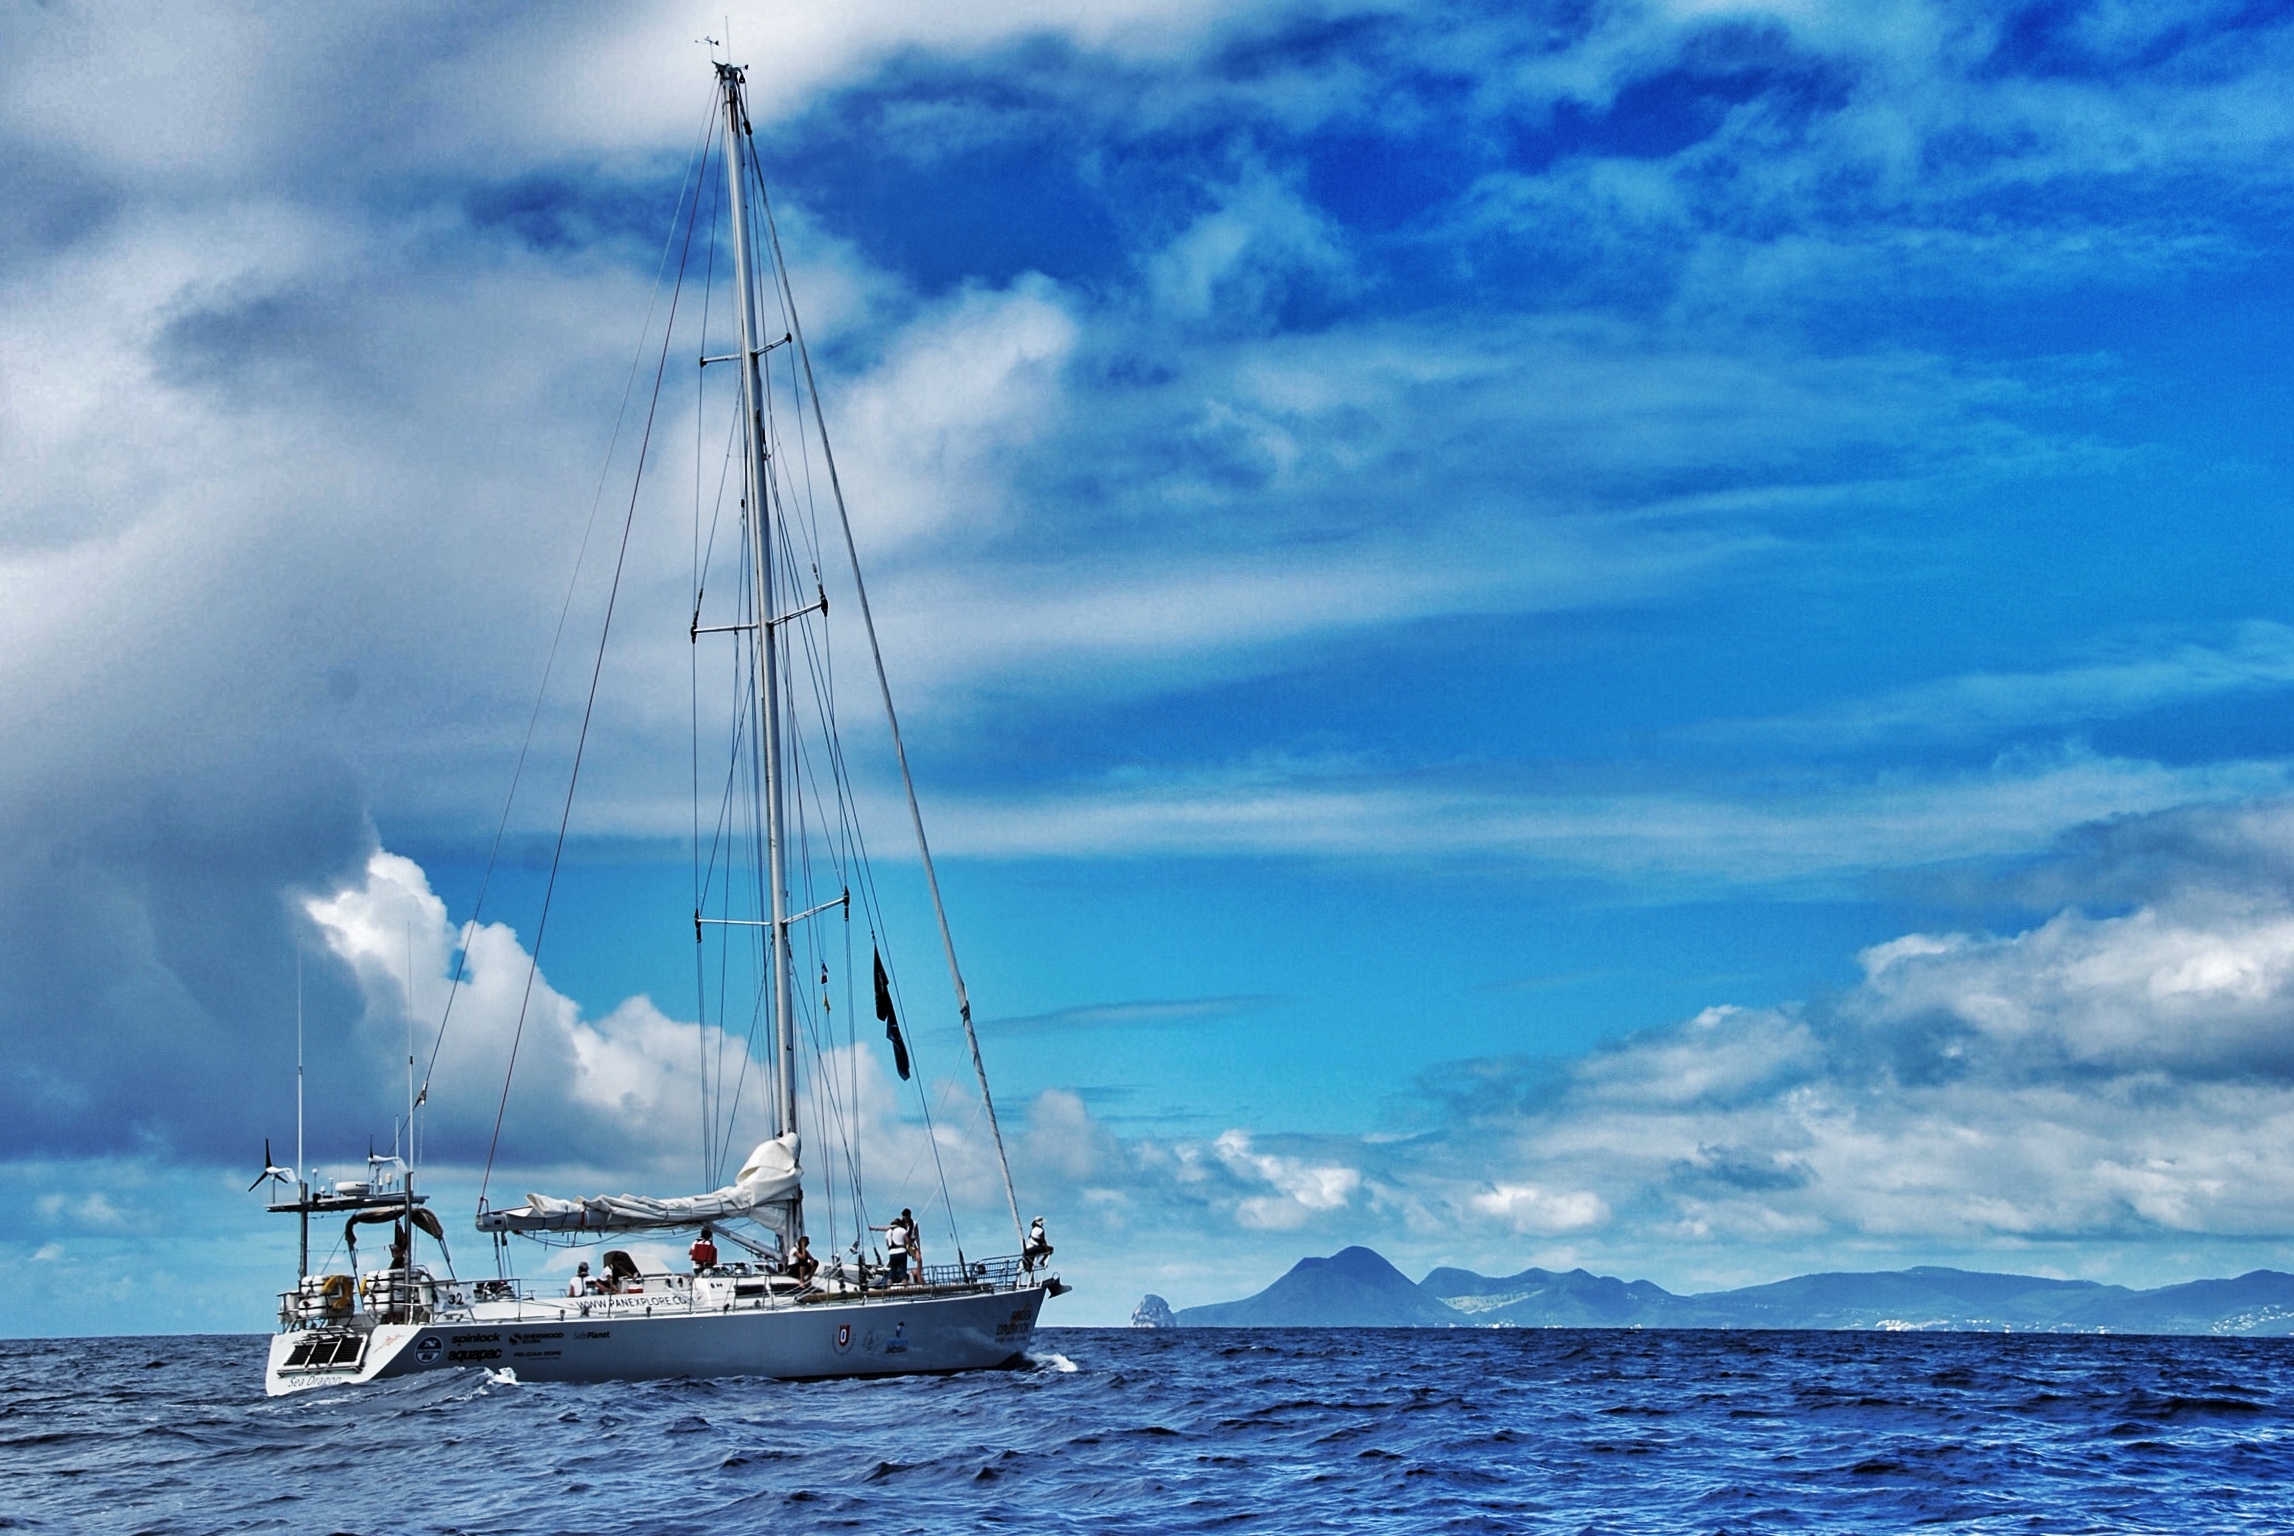 The yacht Sea Dragon, which will sail around the British Isles (eXXpedition)